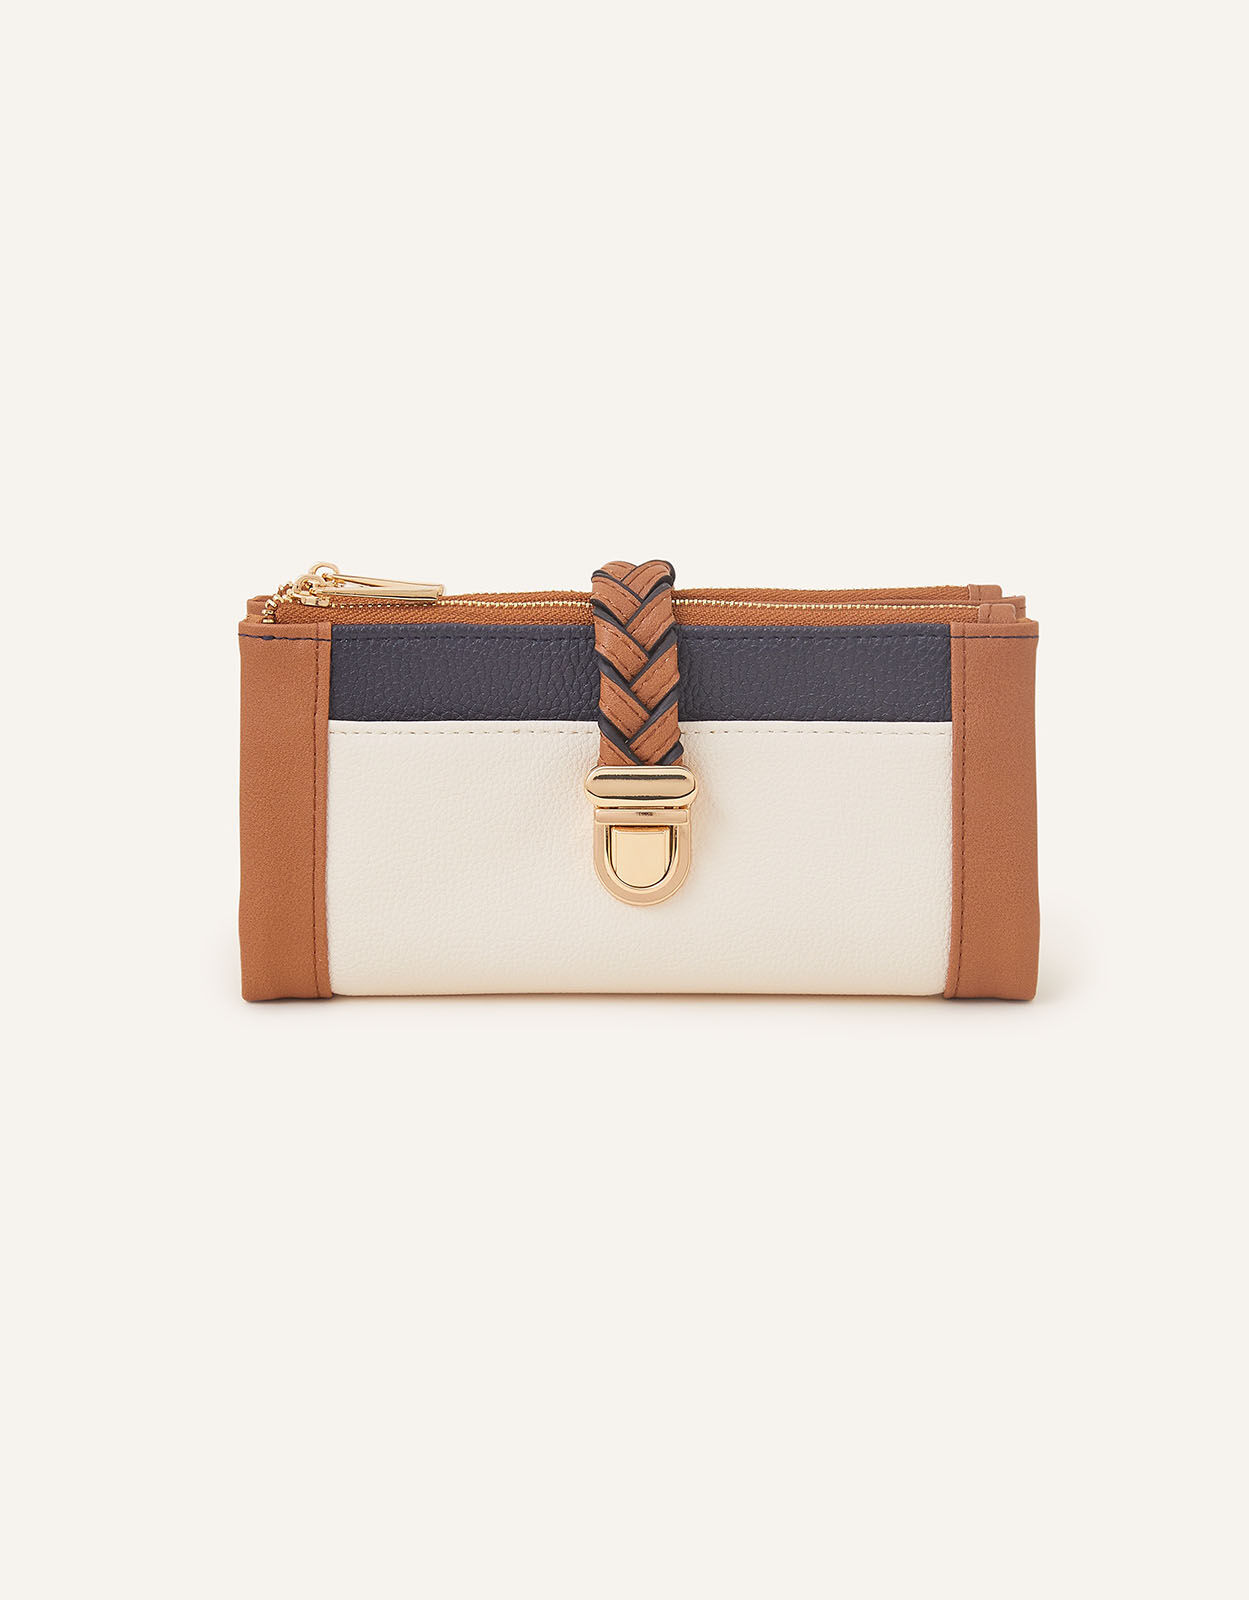 Beautifully Crafted Leather Purses. Made in the UK — CARV